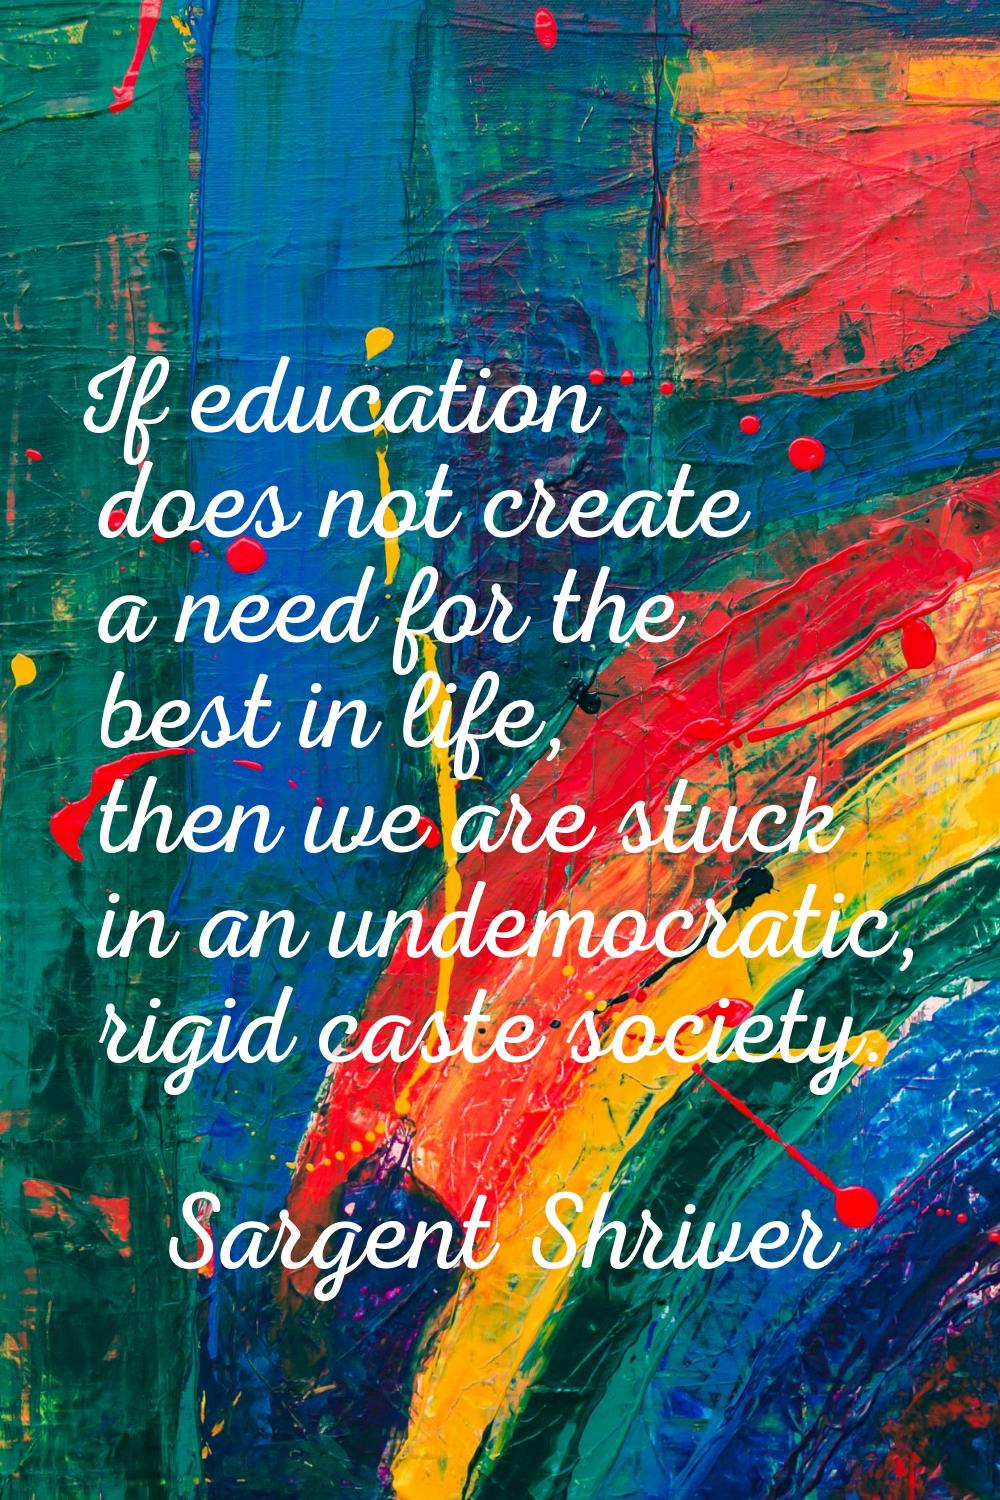 If education does not create a need for the best in life, then we are stuck in an undemocratic, rig